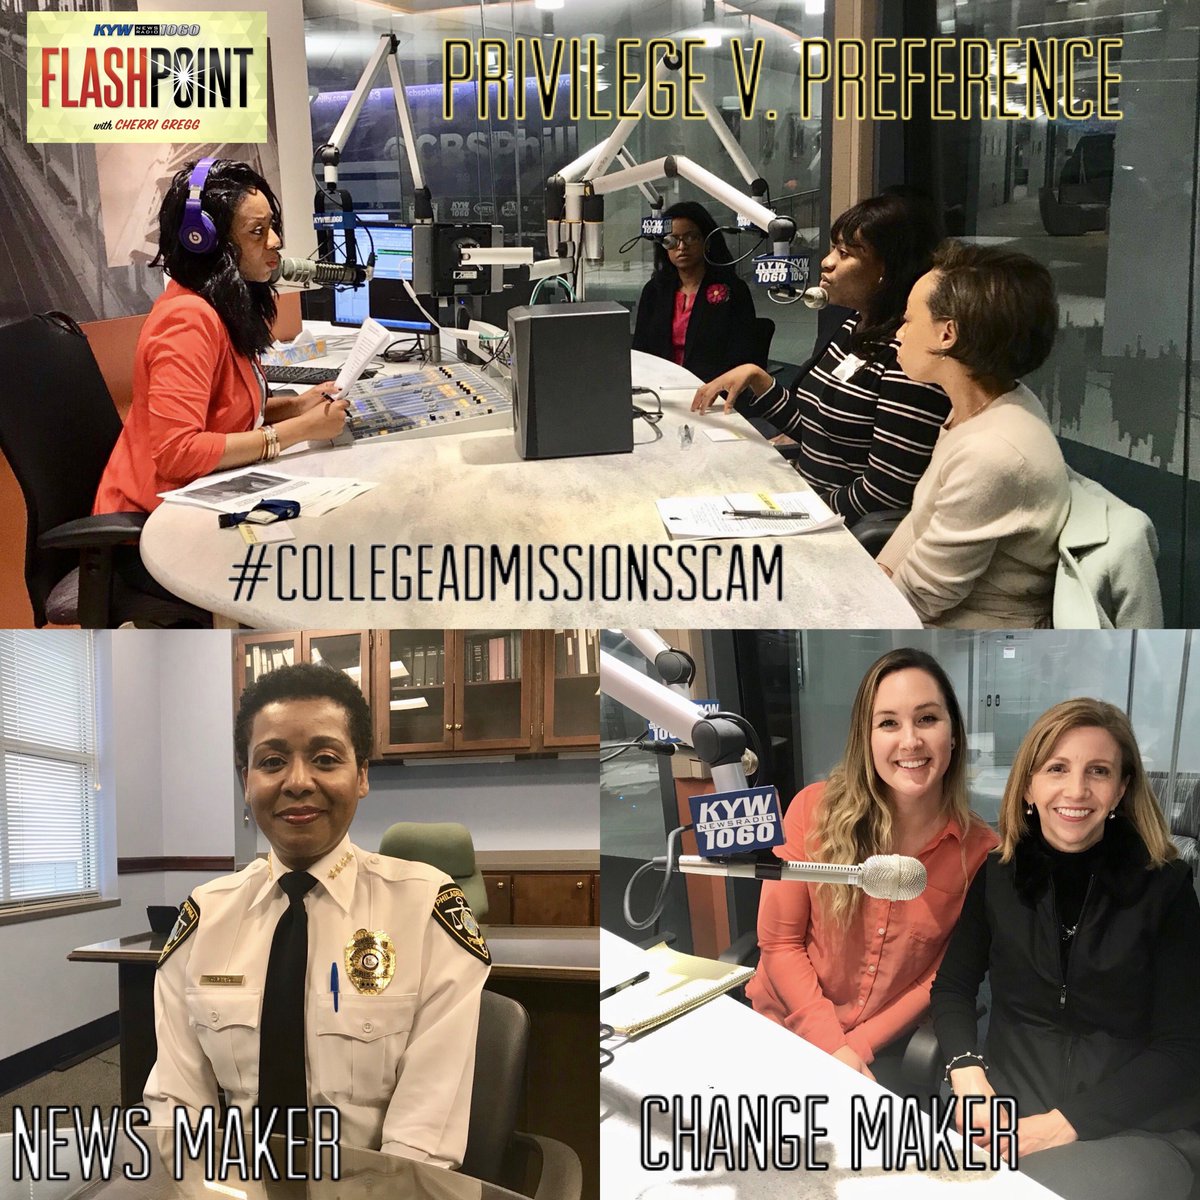 LISTEN AT 8:30 AM @KYWNewsradio --> bit.ly/2CjXz2t

#CollegeAdmissionsScam - @PhilaNAACP, Farah Jimenez @PhilaEdFund, Kimberley Lewis @PhillyFutures and @LafCol student talk Privilege v. Preference

@PhillyPrisons first female commissioner

@Vision2020women on #Women100